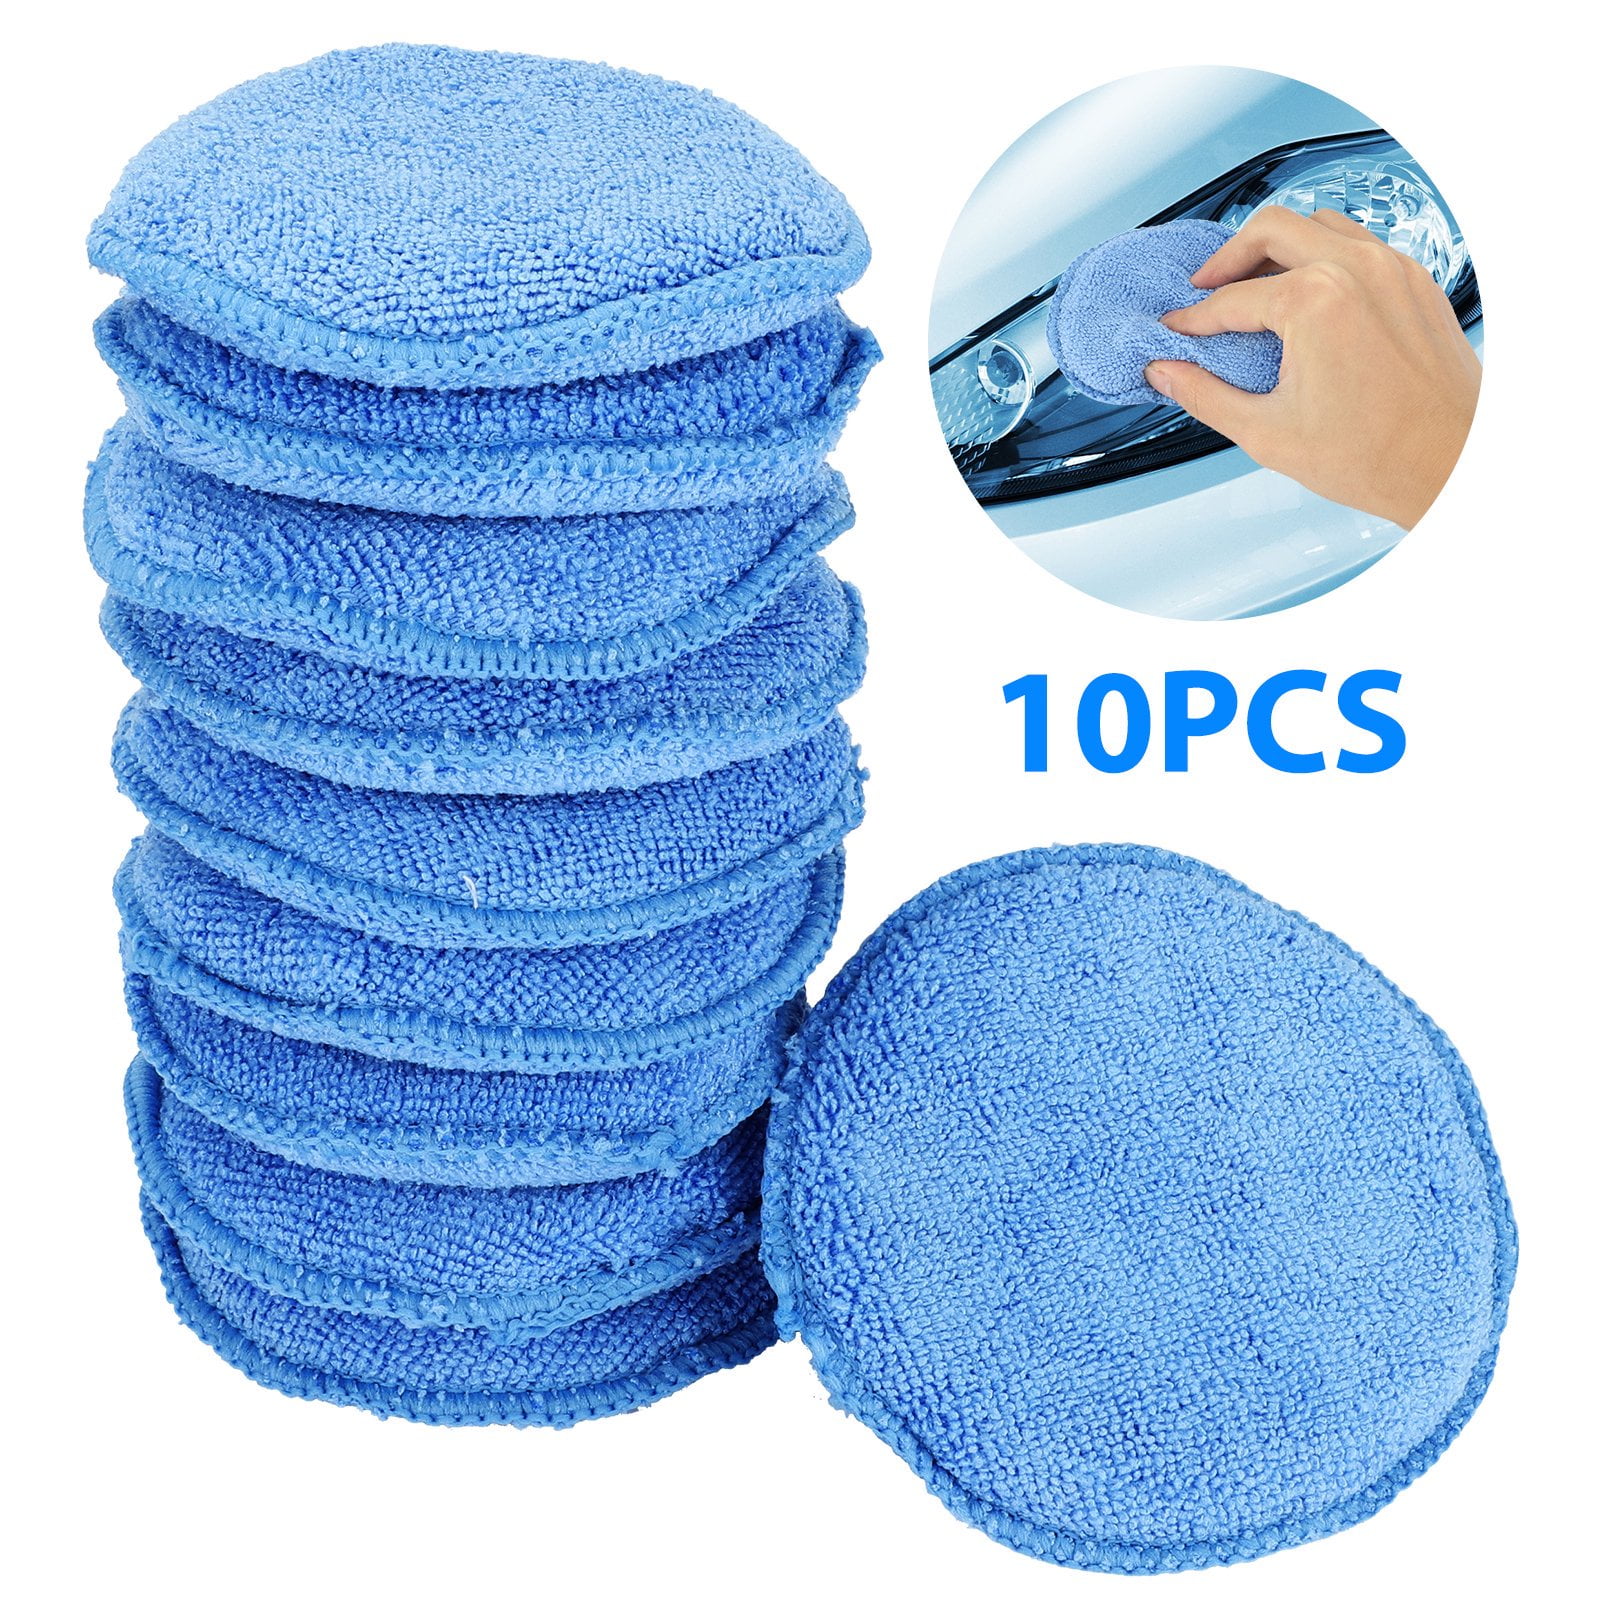 Microfiber Car Wash Sponge Non-Scratch Microfibers for Cleaner Cars, Great  for Everyday Cleaning - Automobile Cleaning Sponges Essential Part of Any